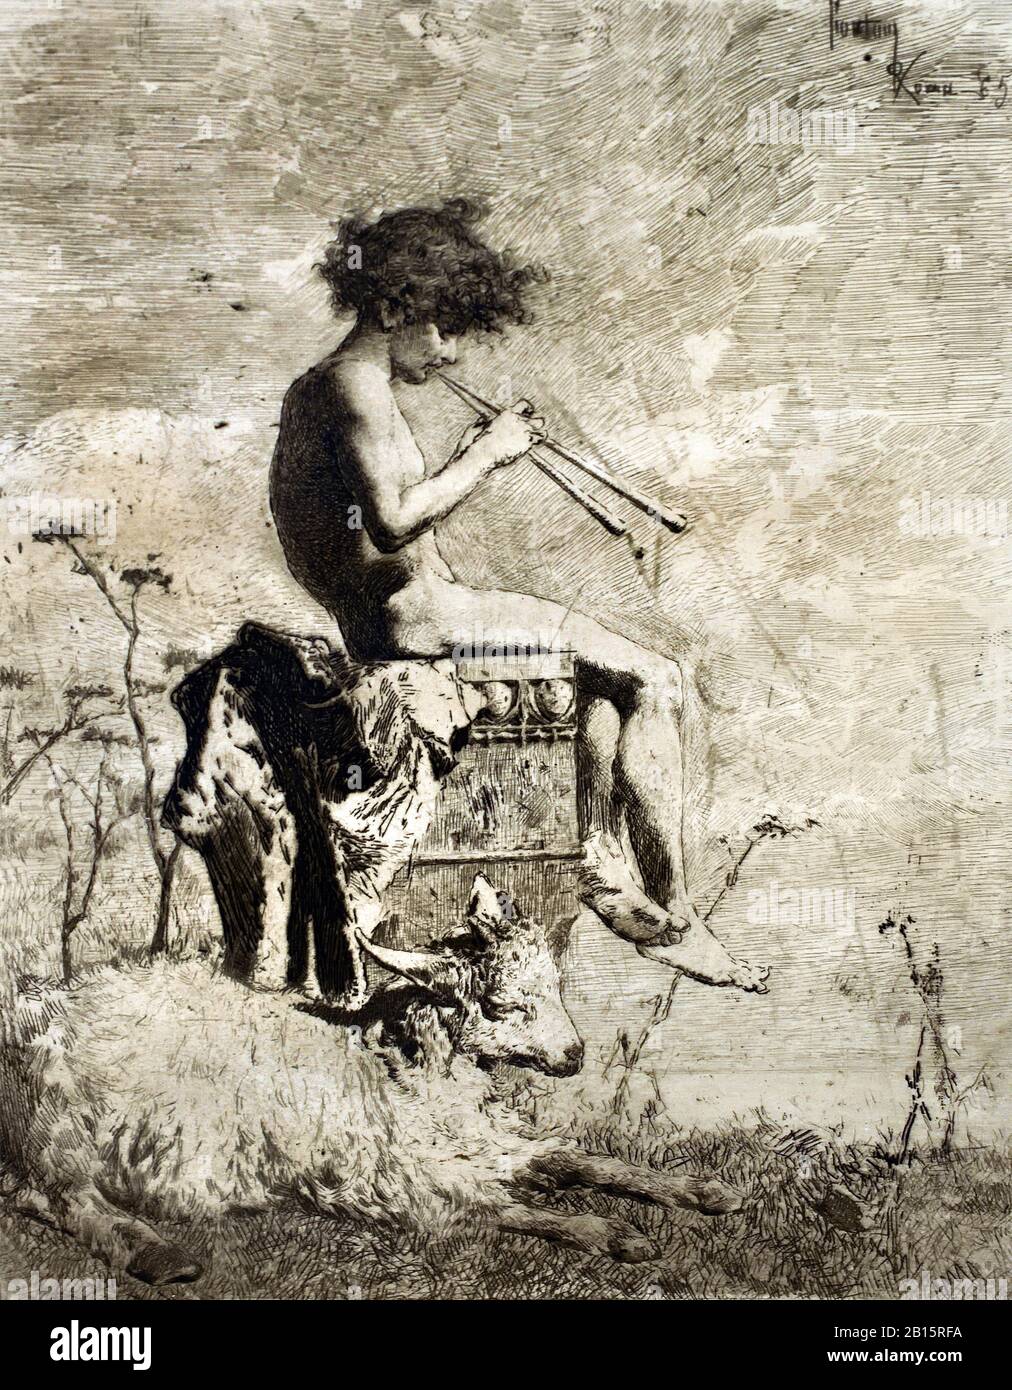 Idell, Flauto player, 1865 Mariano Fortuny y y Marshal 1838-1874, Spagna, spagnolo, incisione, incisione, Foto Stock